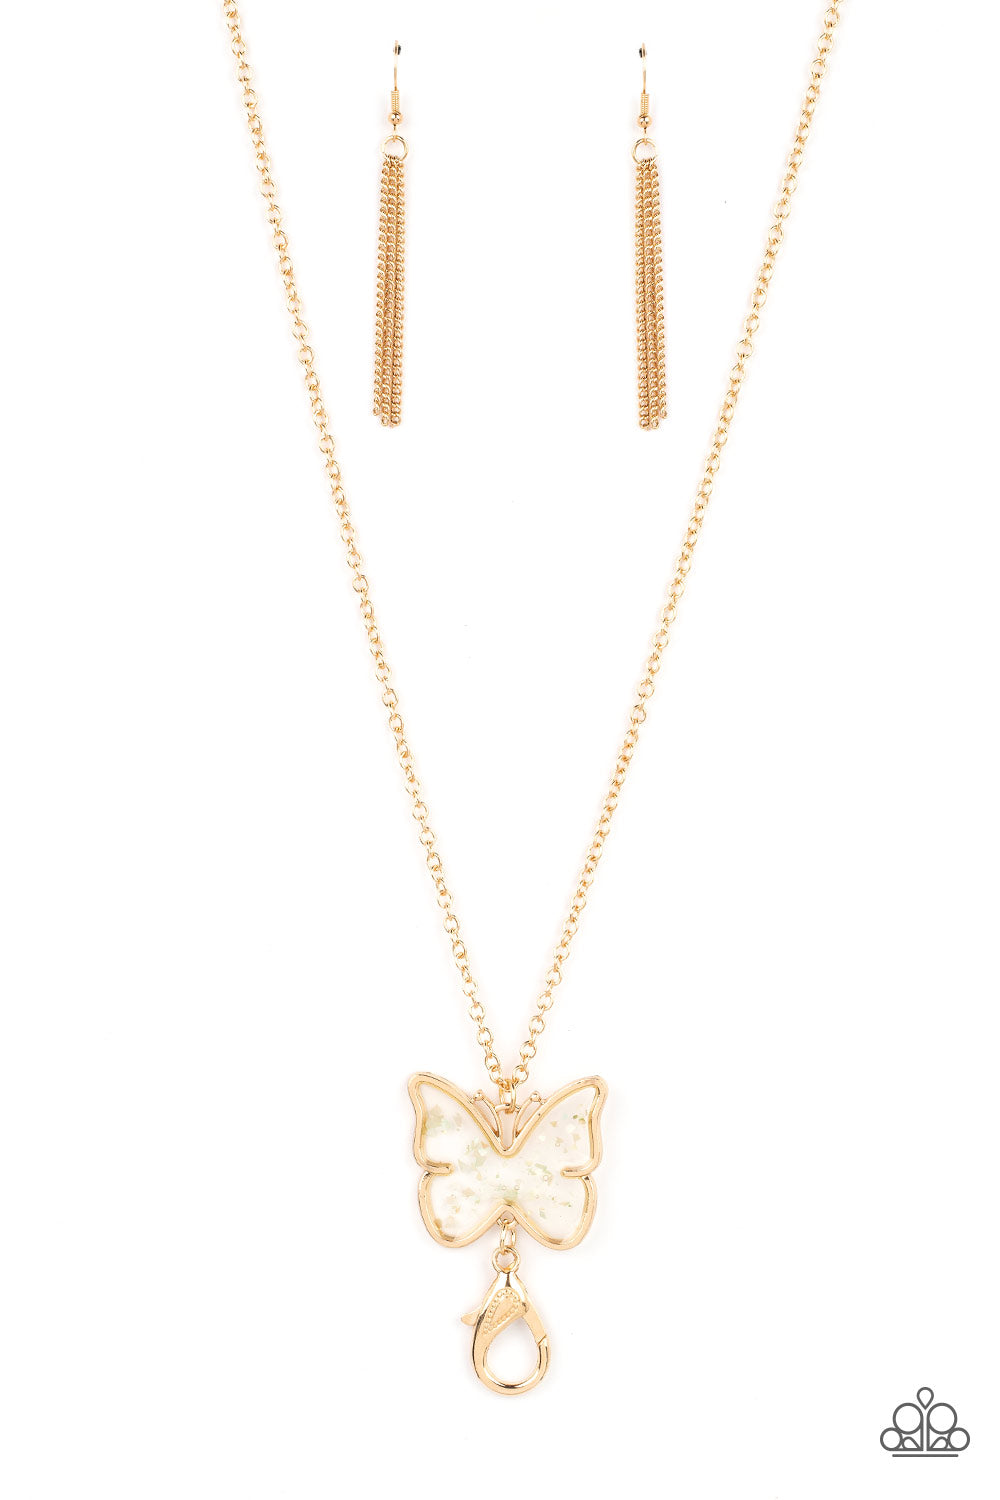 Gives Me Butterflies - Gold Butterfly Frame/Dainty Flecks of Shell Paparazzi Pendant LANYARD Necklace & matching earrings